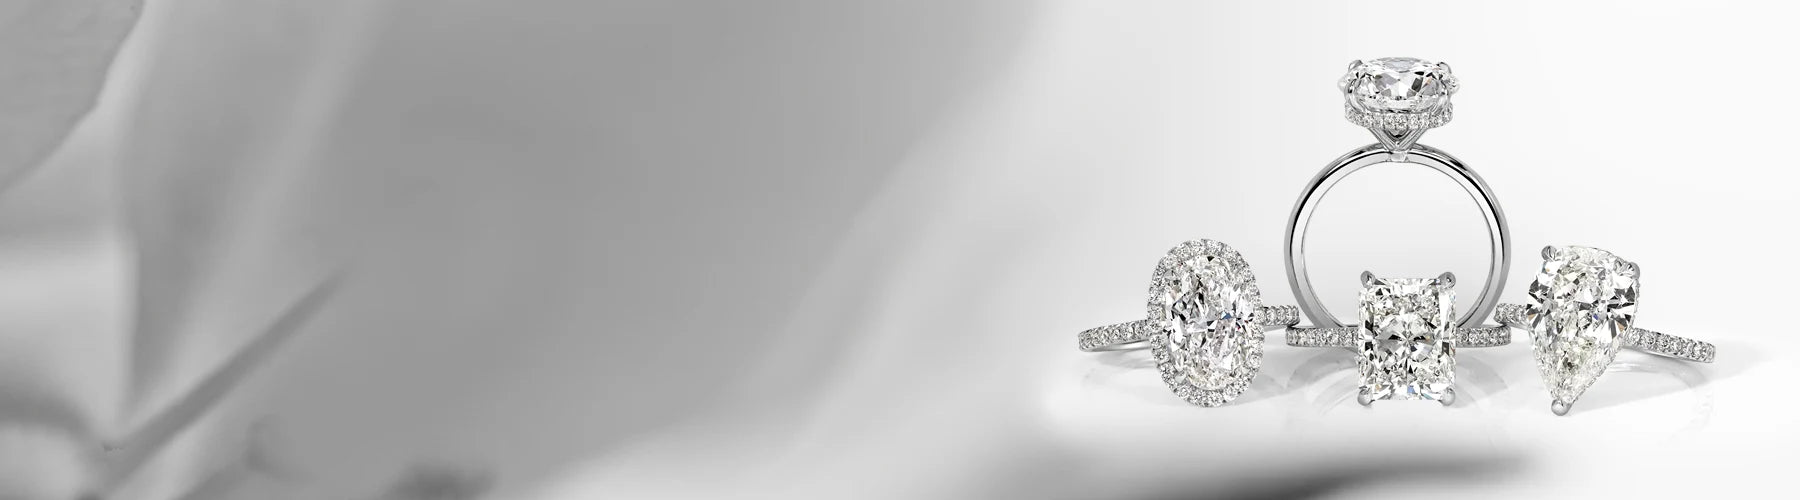 customize your own personal engagement ring for less at Quorri